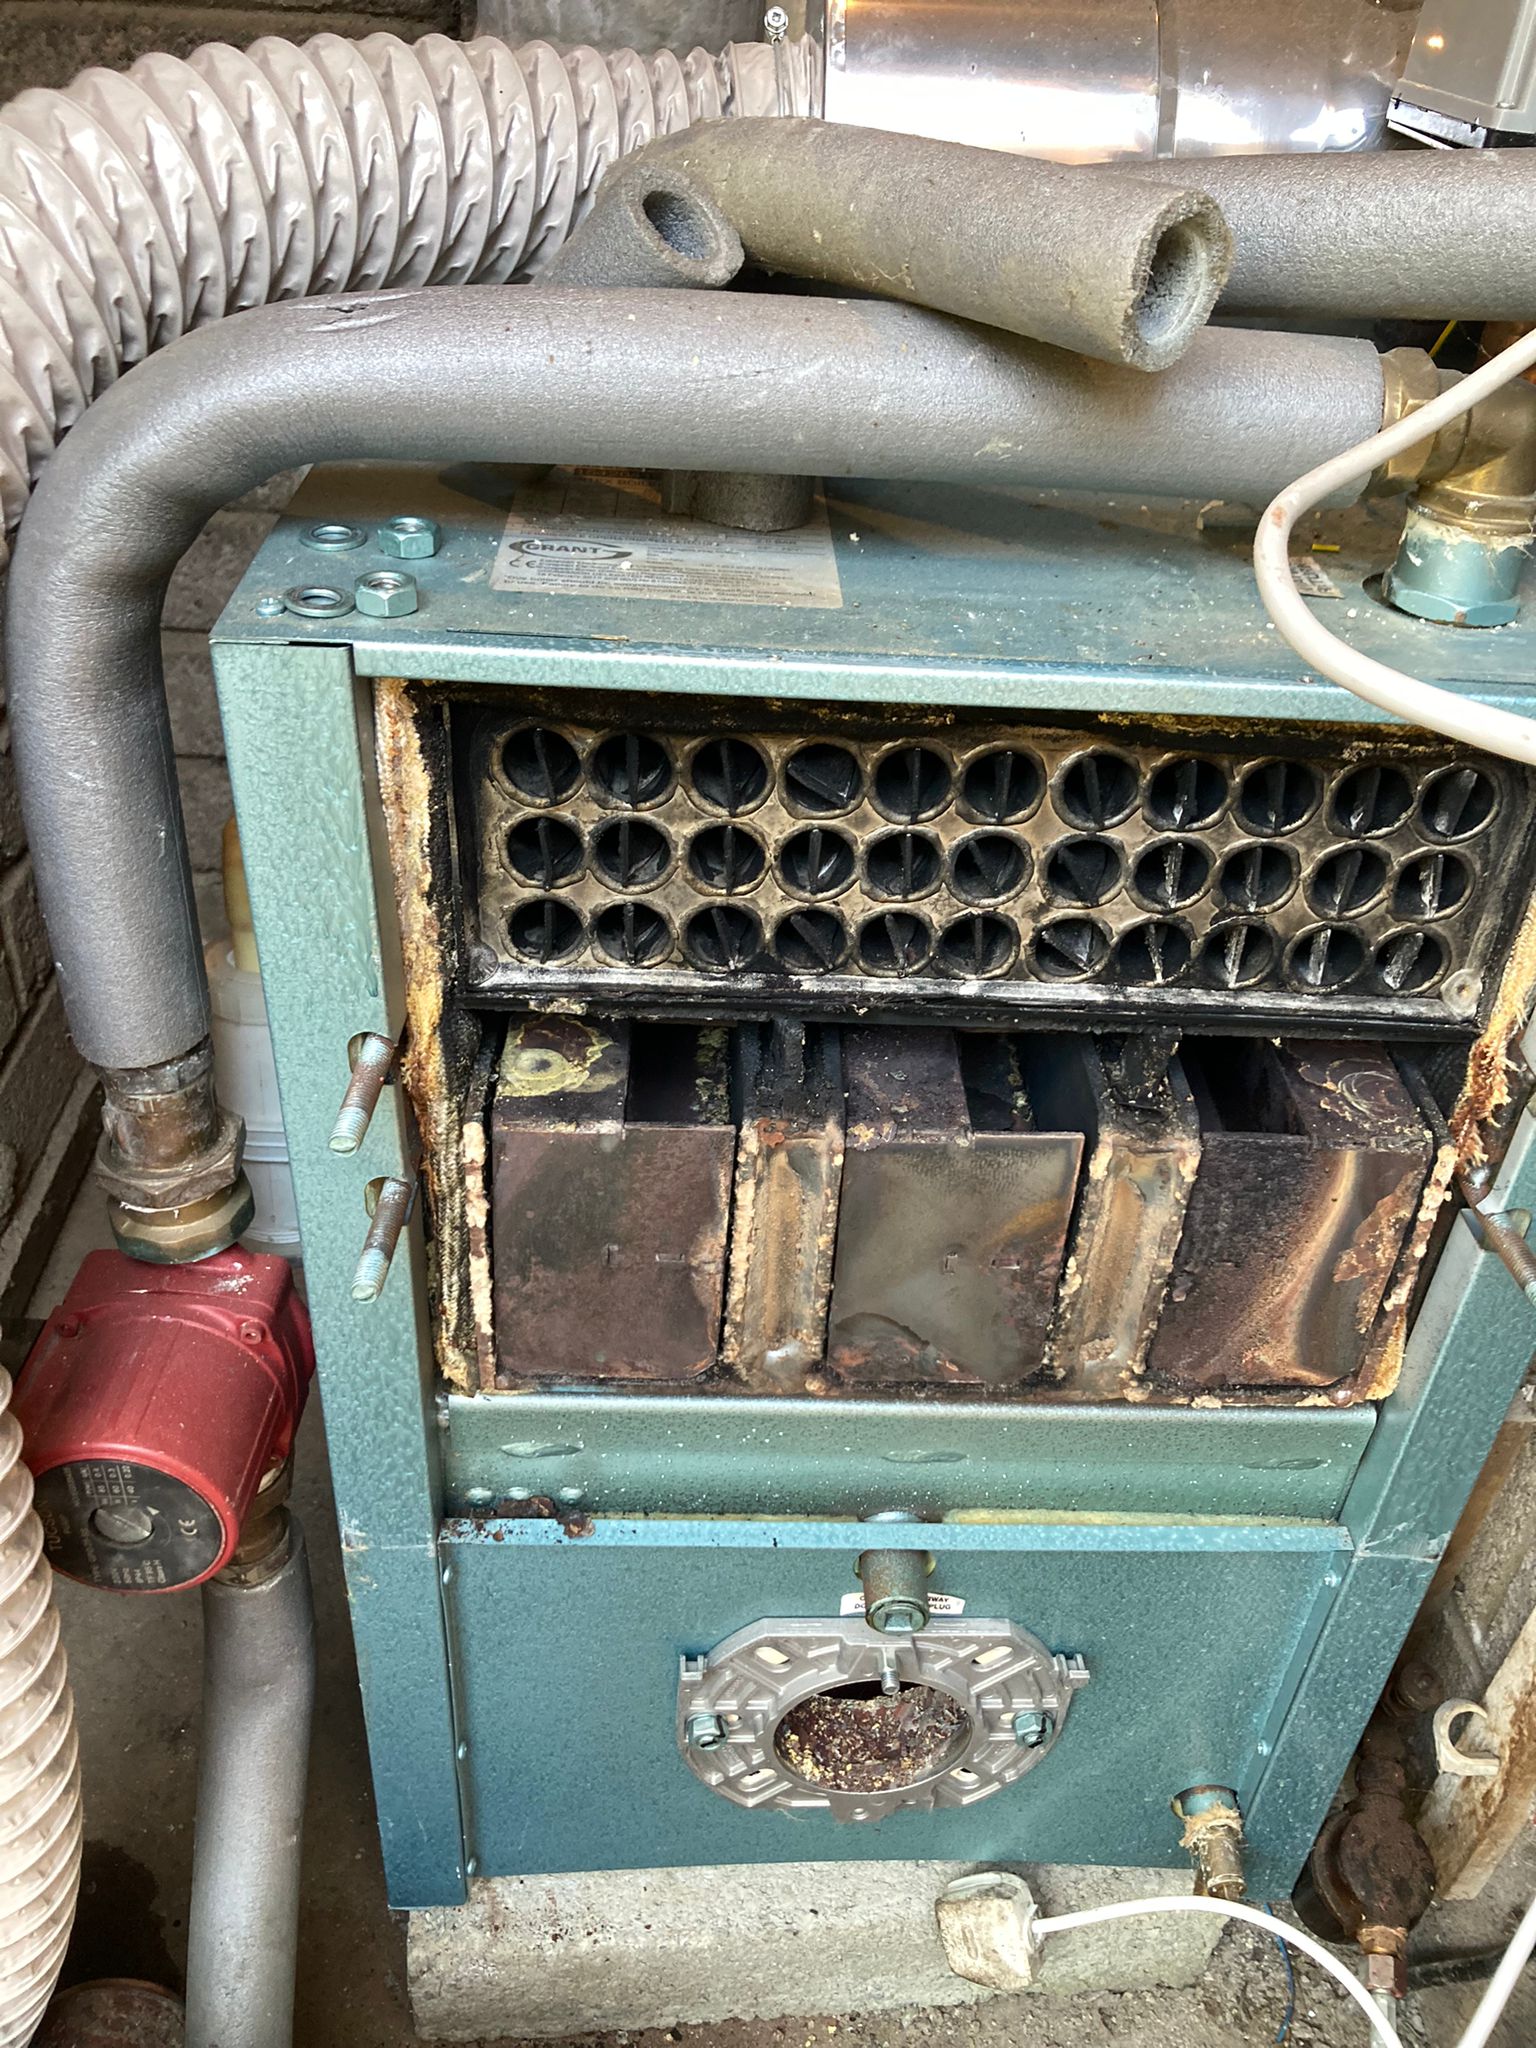 Oil GRANT Boiler in Need of Replacement